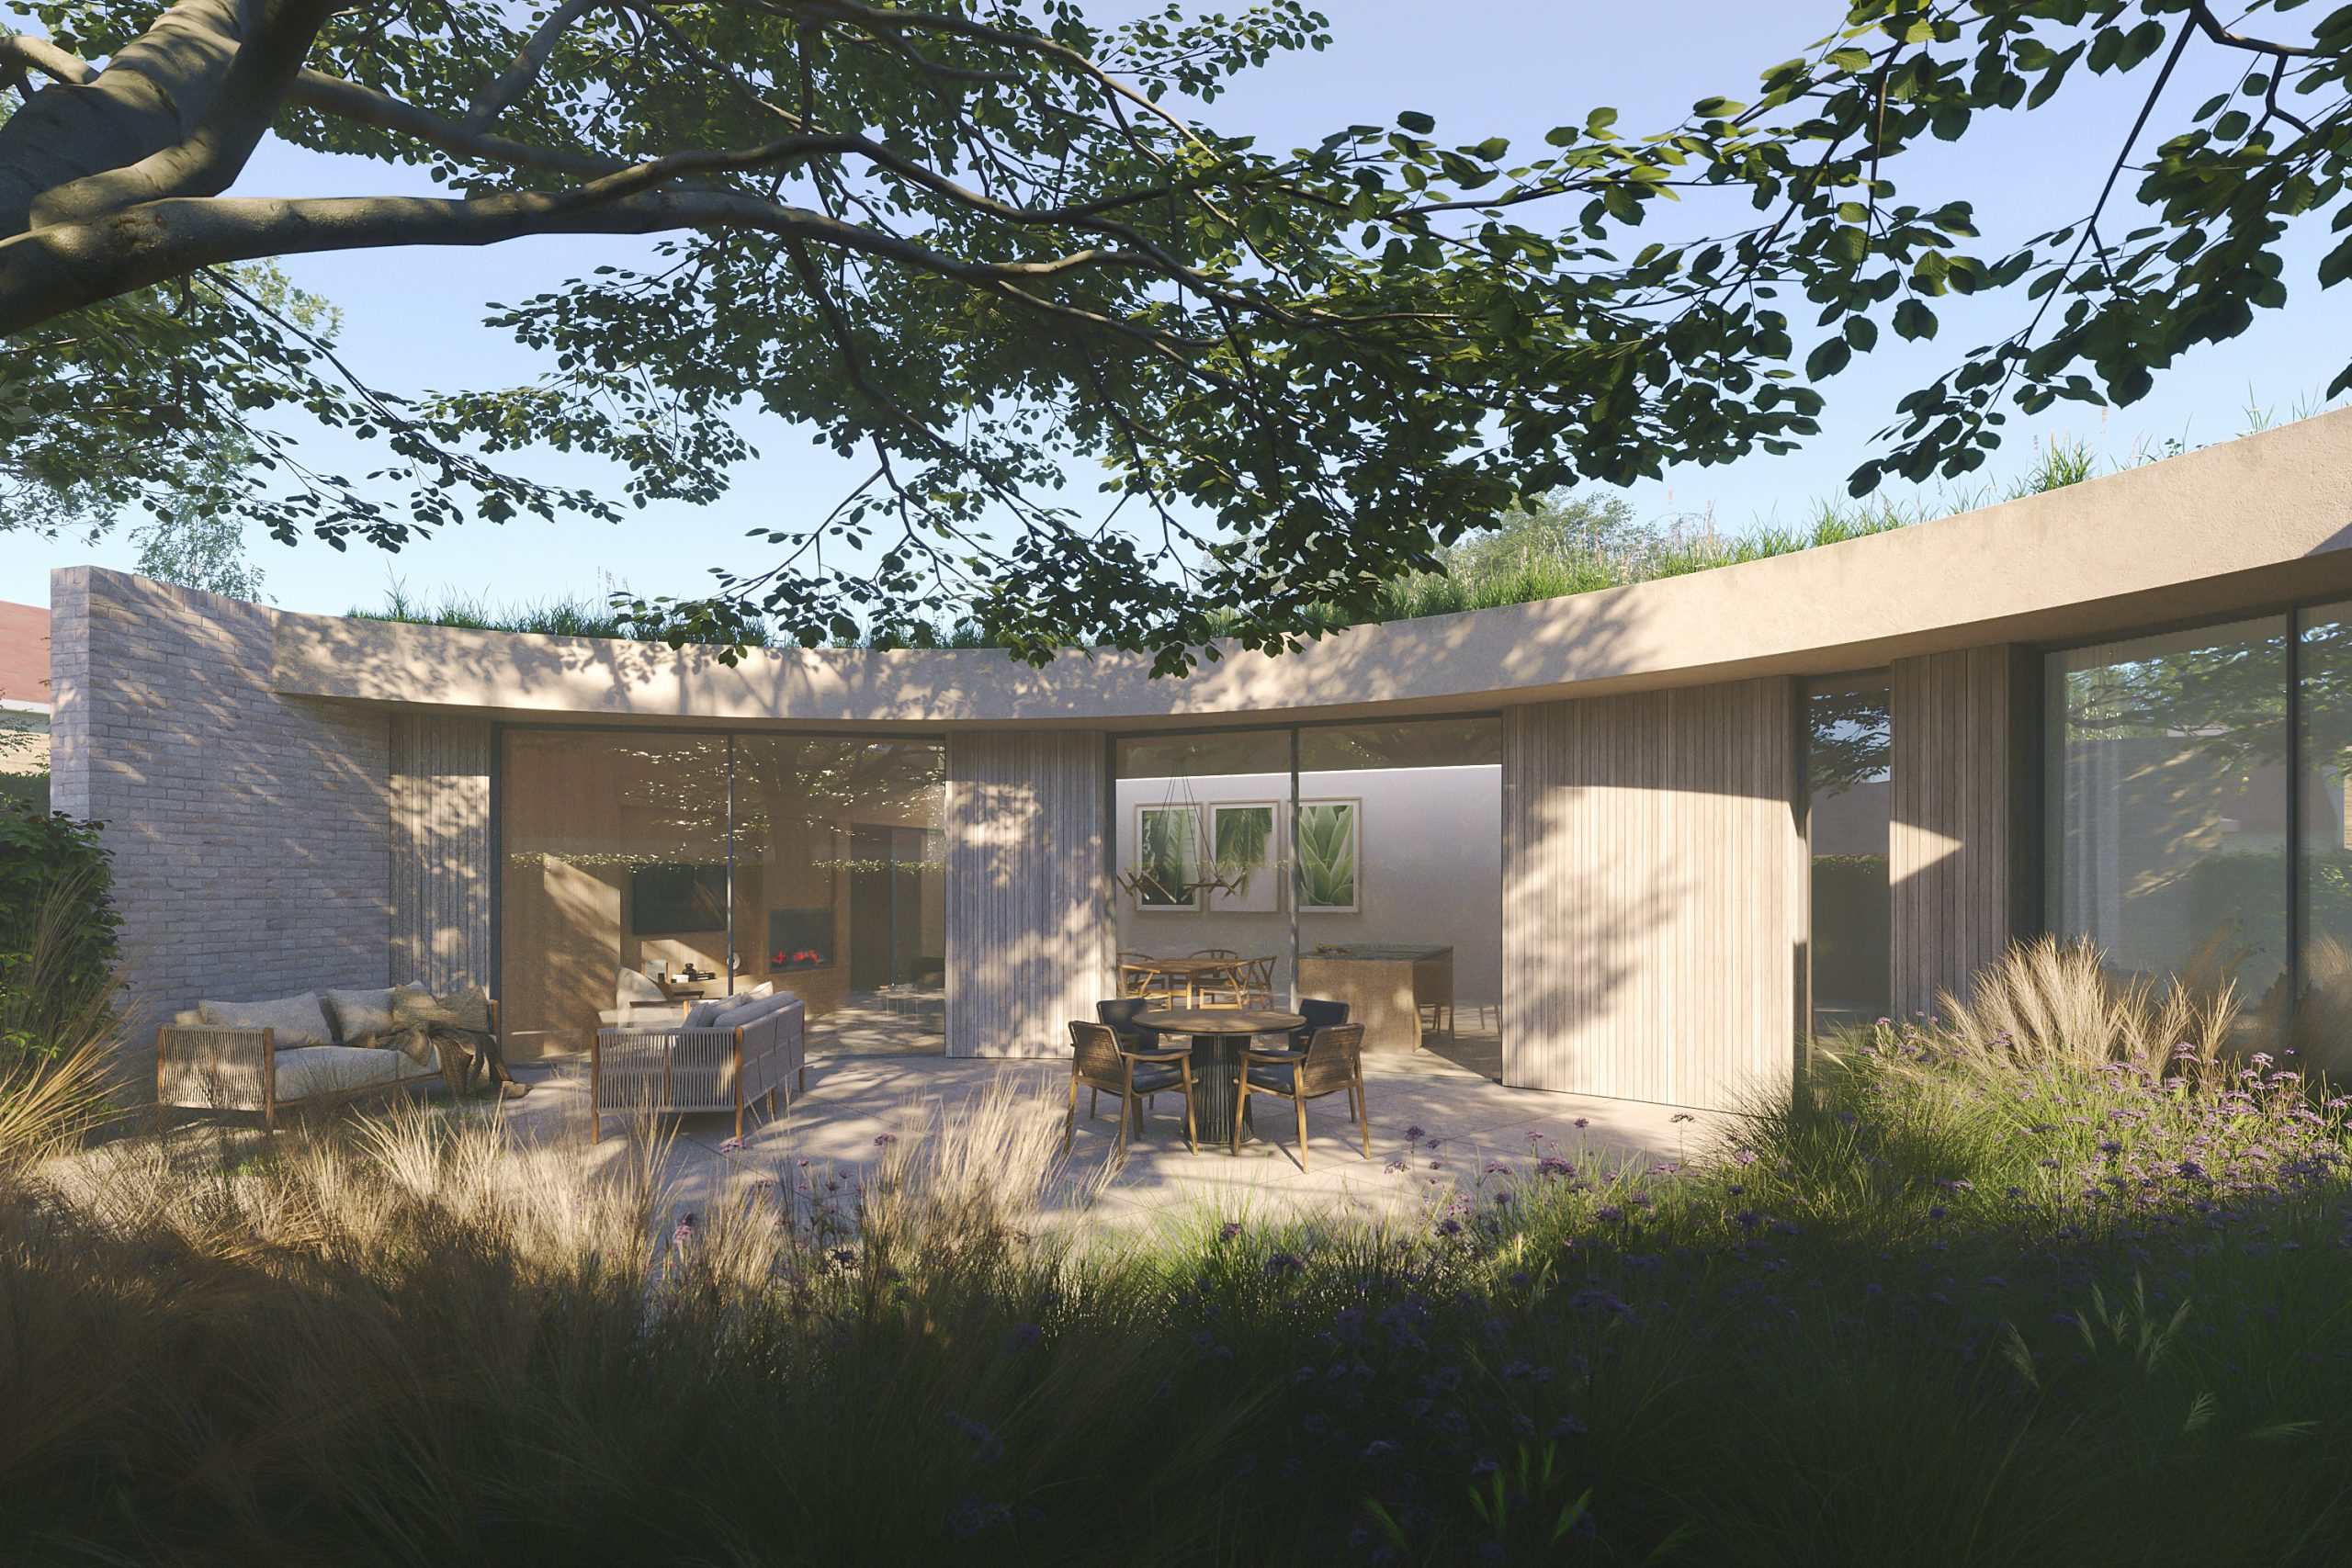 Planning approval in Hindhead